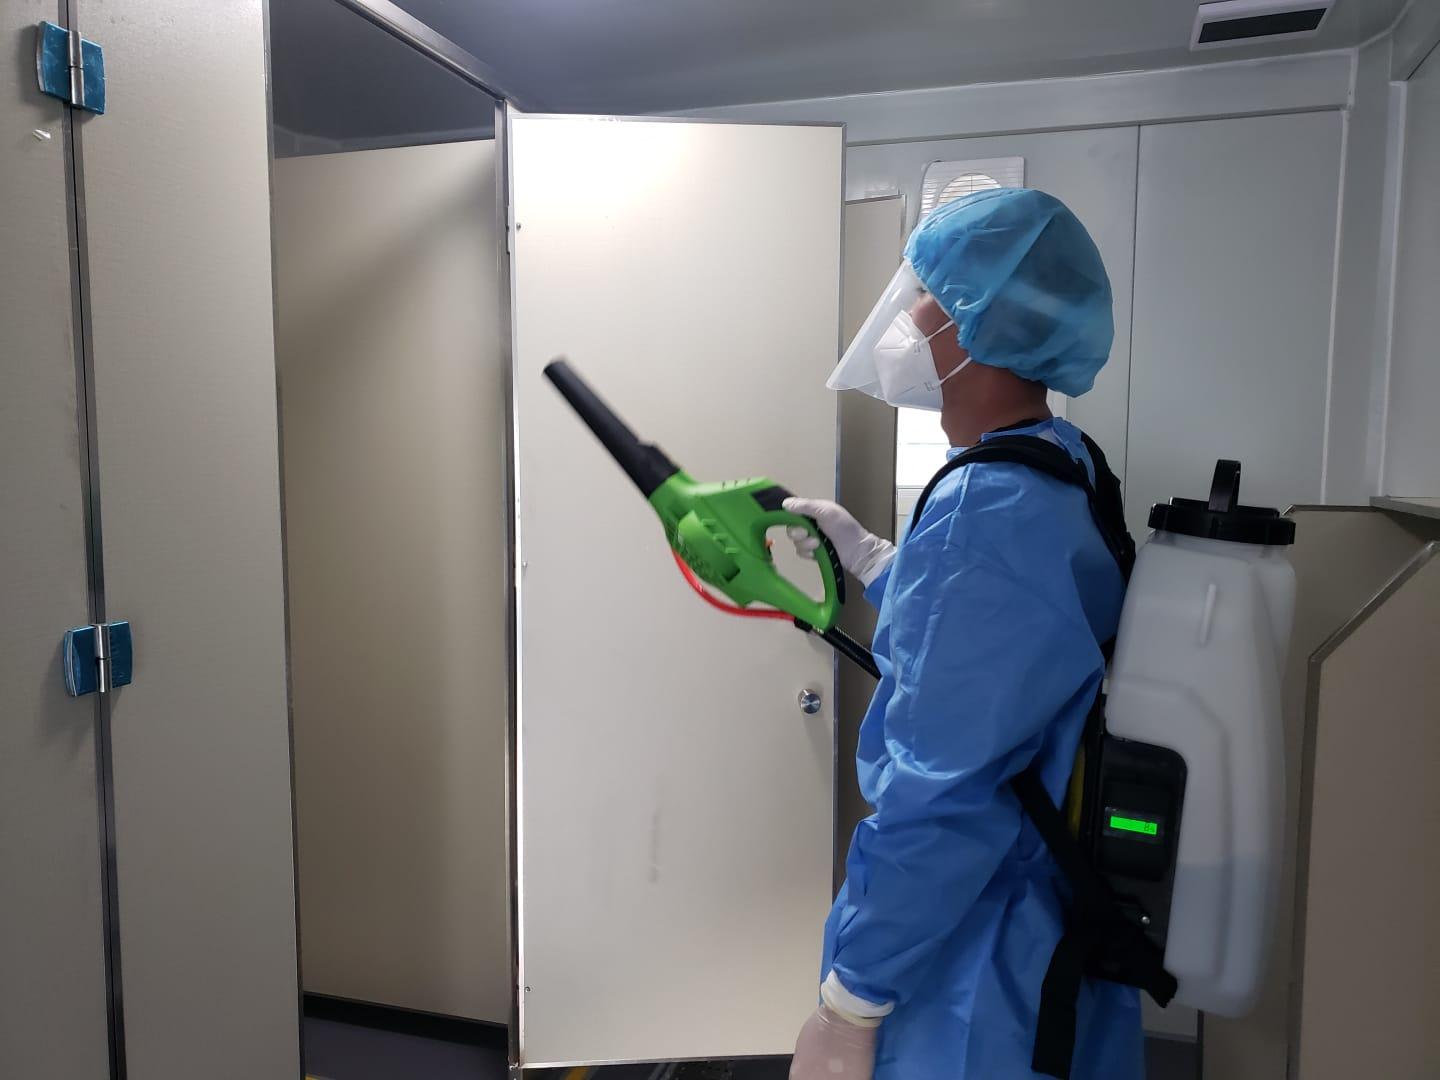 Regarding a photo circulating on the Internet claiming that toilets in the Tsing Yi community isolation facility are without any partitions, a spokesman for the Security Bureau clarified today (March 3) that the photo is not a toilet in the isolation facility. Photo shows an outsourced cleaning company worker conducting disinfection and cleaning at the Tsing Yi community isolation facility, which is equipped with toilet compartments.